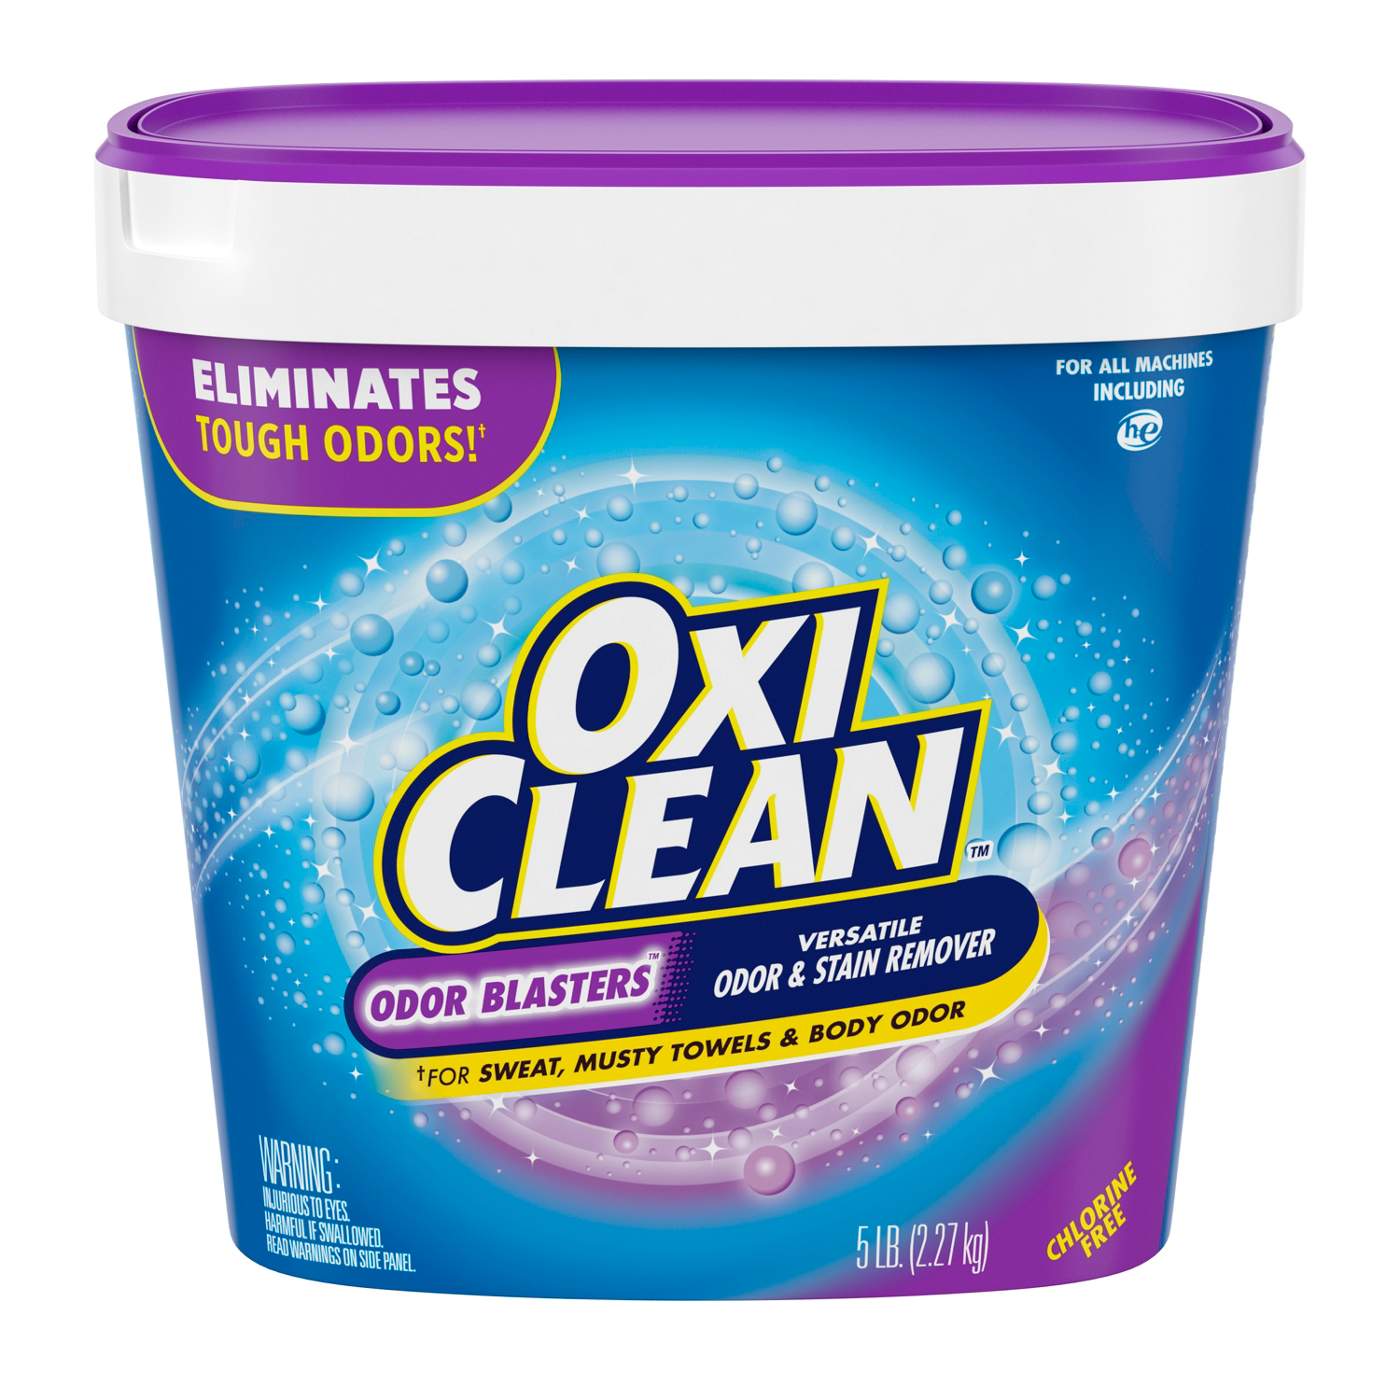 OxiClean Odor Blasters Laundry Odor & Stain Remover; image 1 of 3